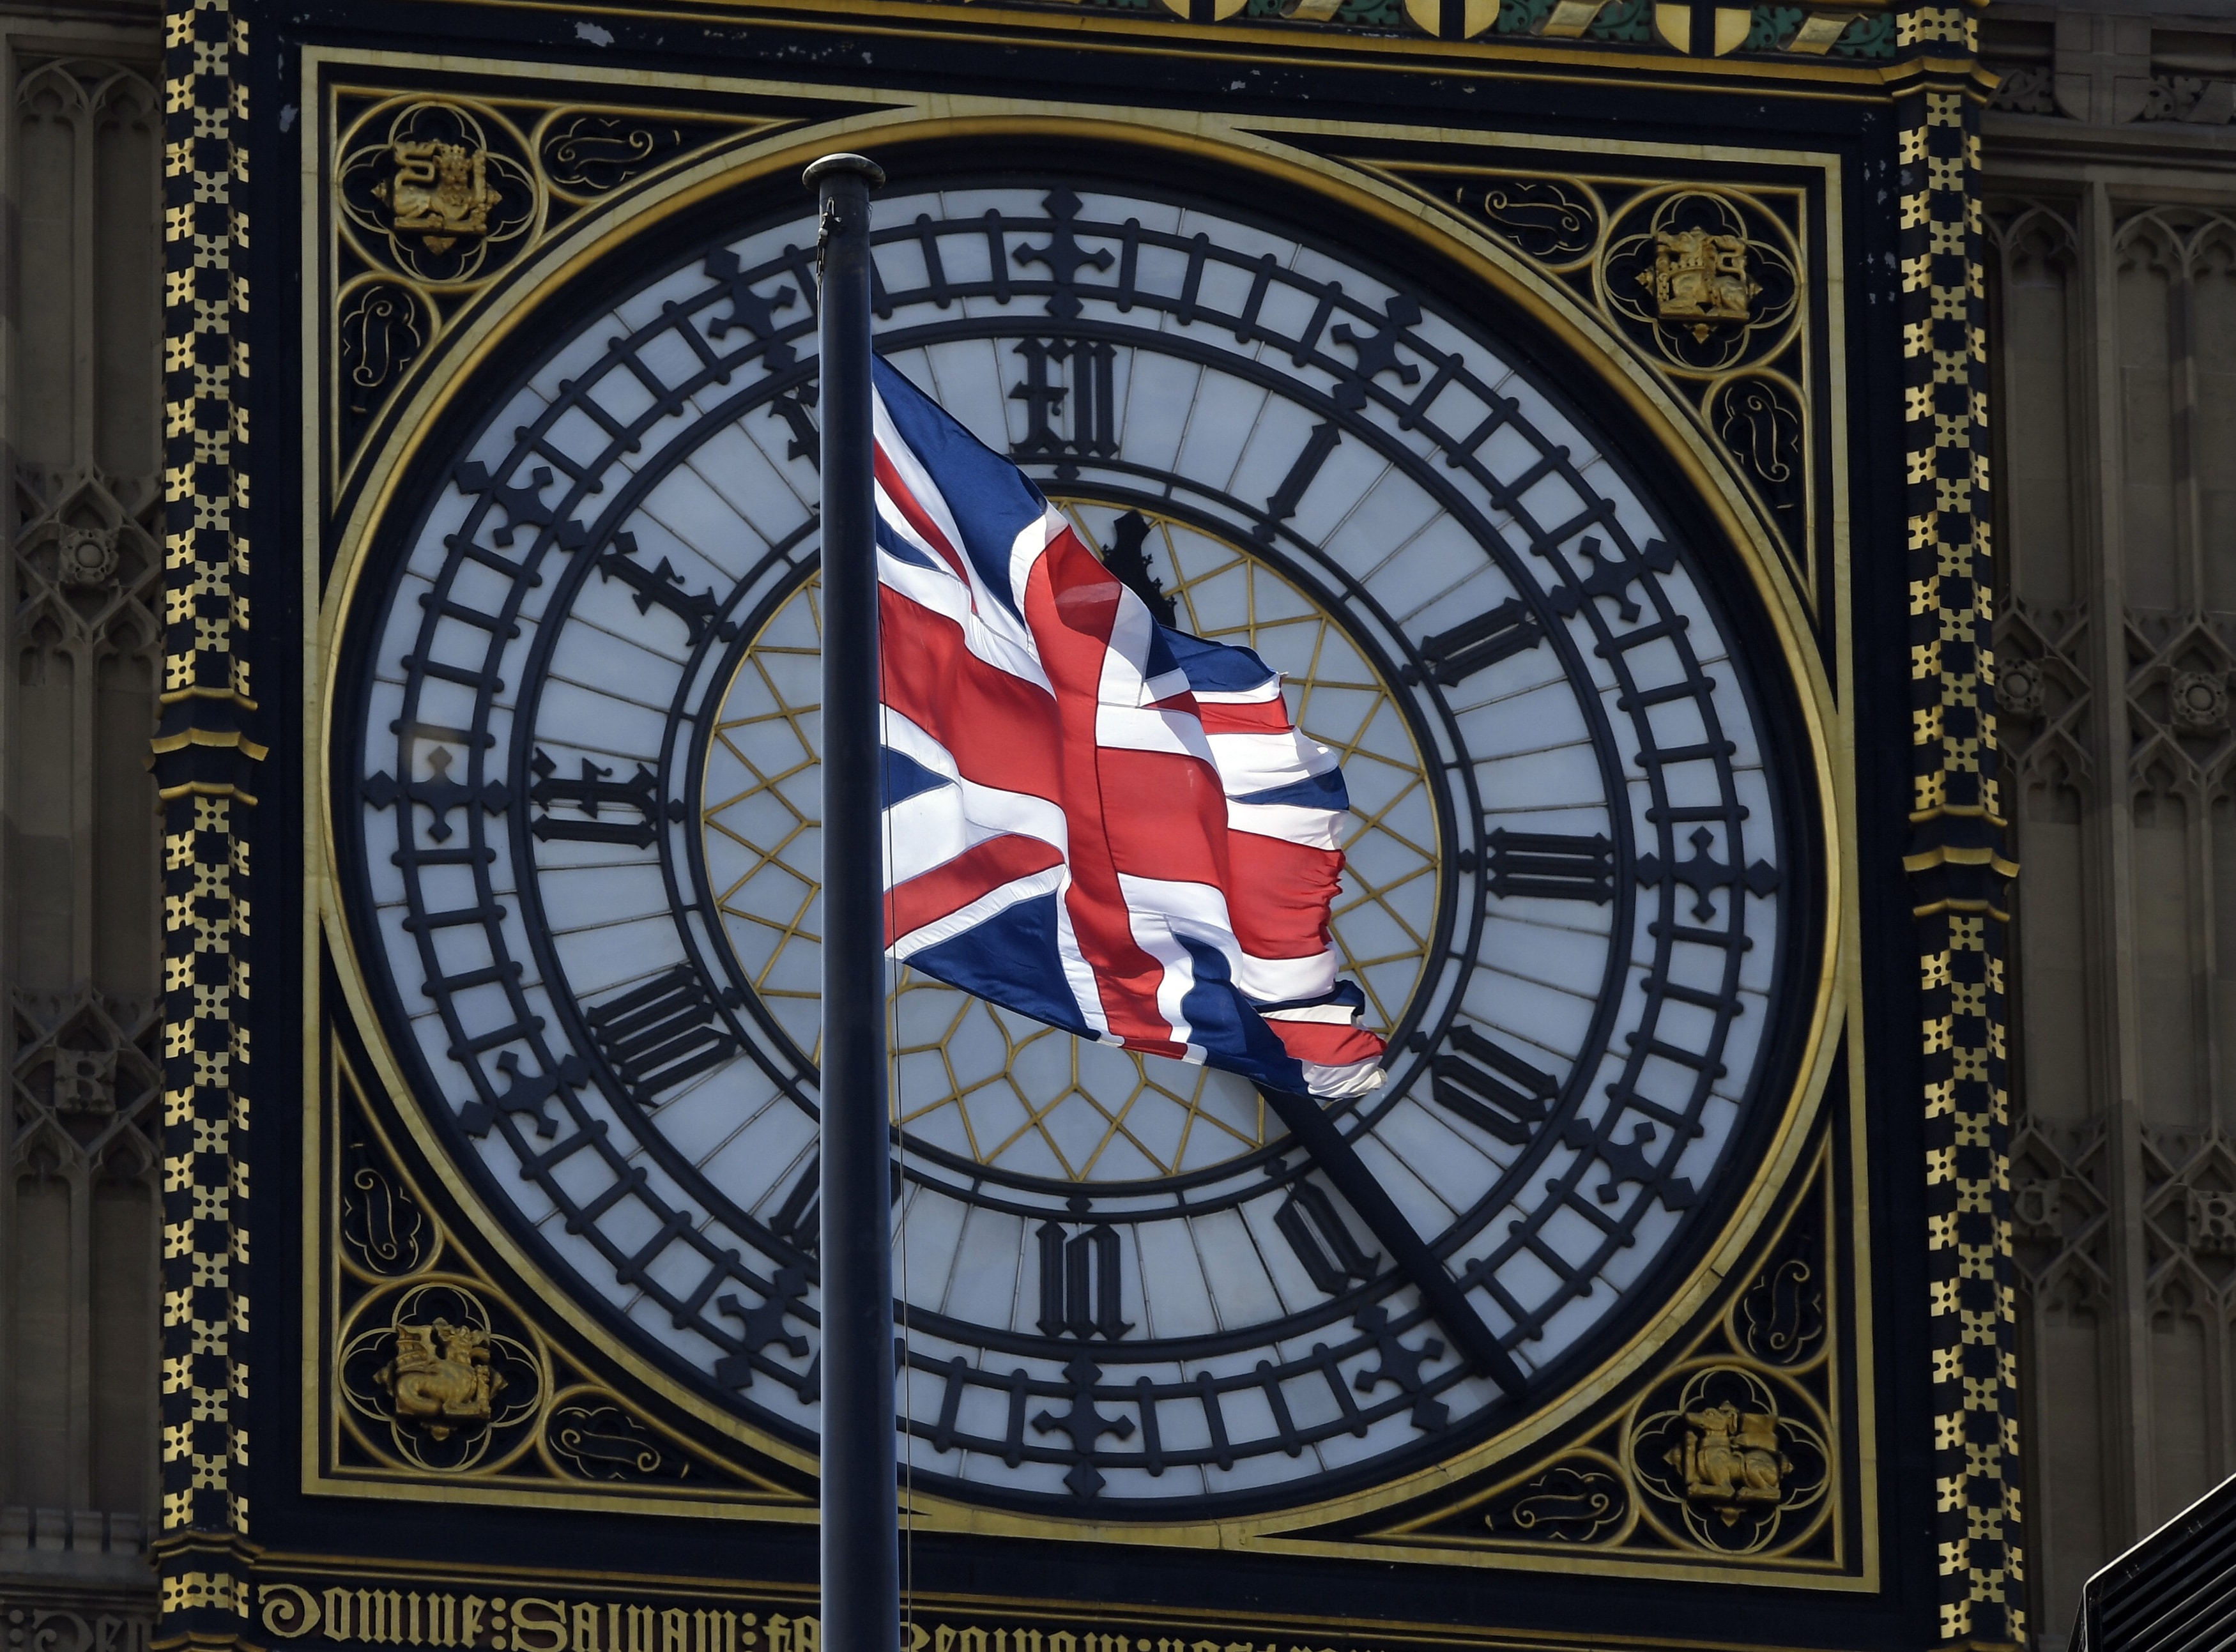 A Union Flag flies in front of the Big Ben clock face abover the Houses of Parliament in central London